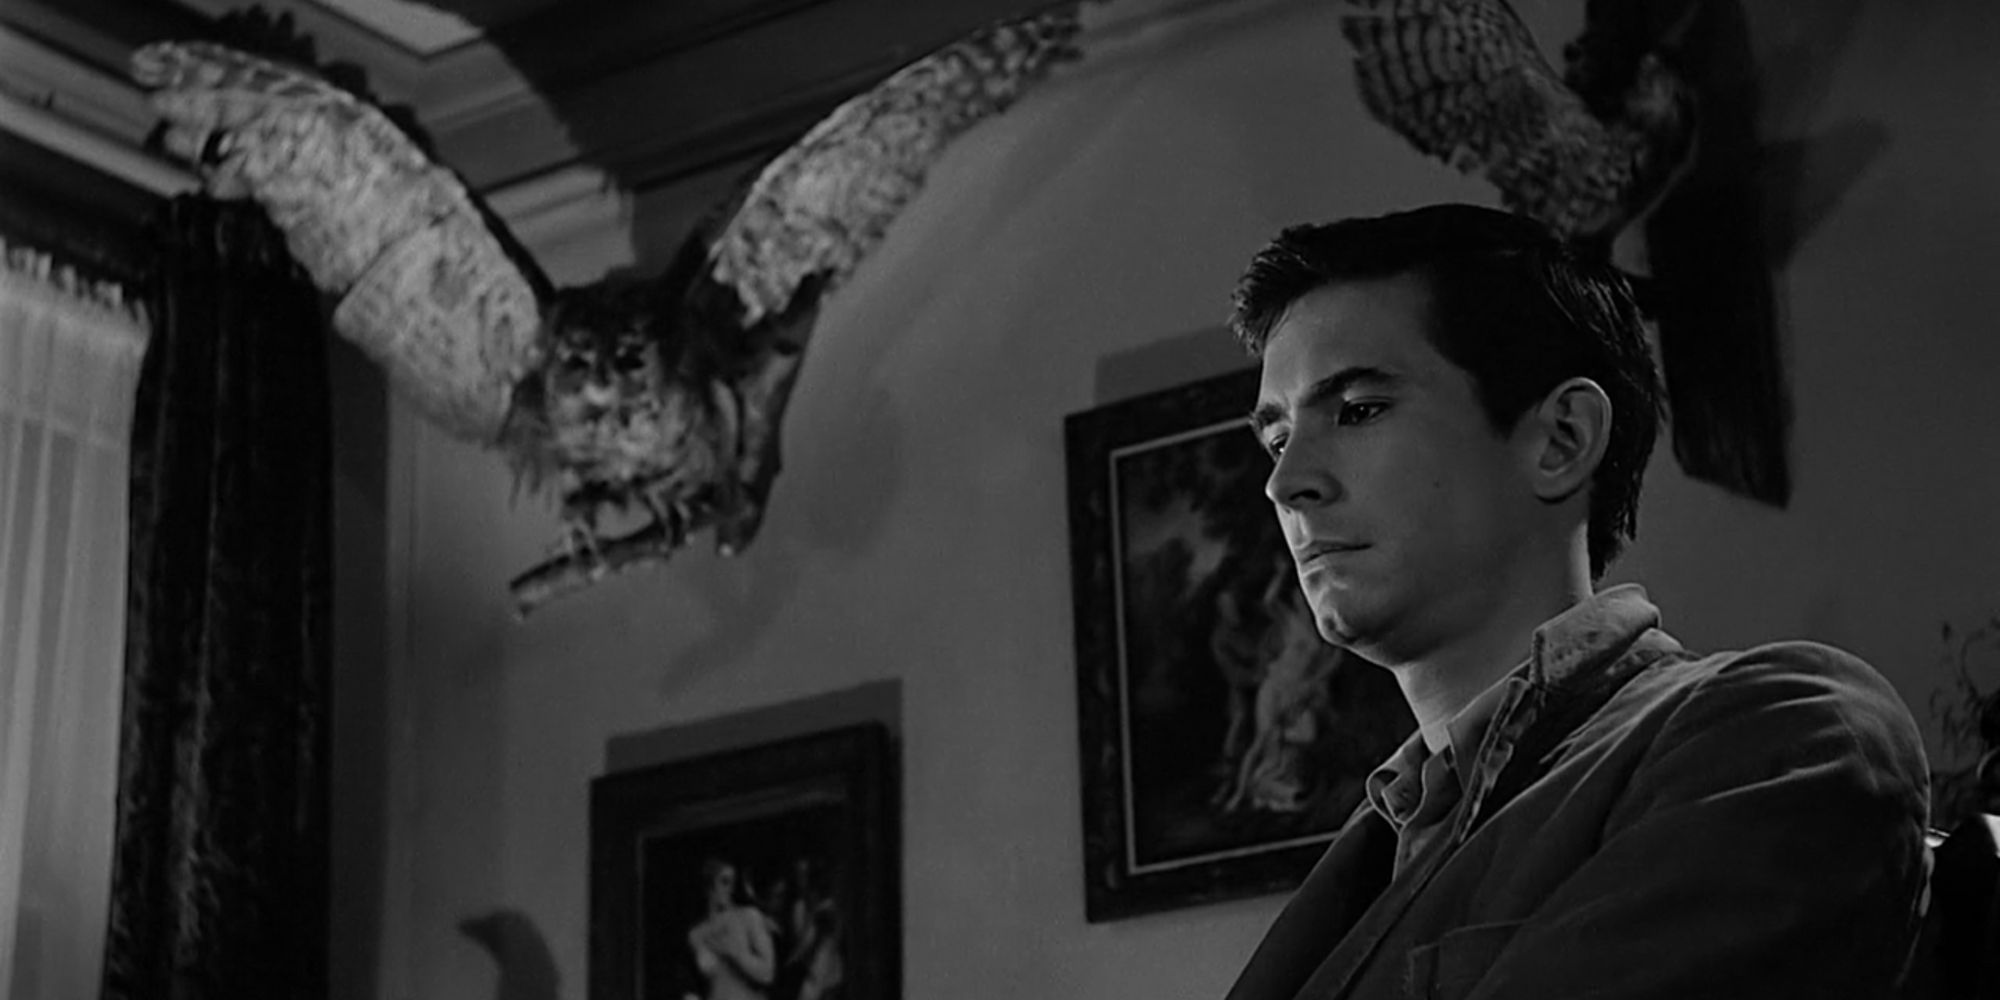 Anthony Perkin as Norman Bates in Psycho (1960)